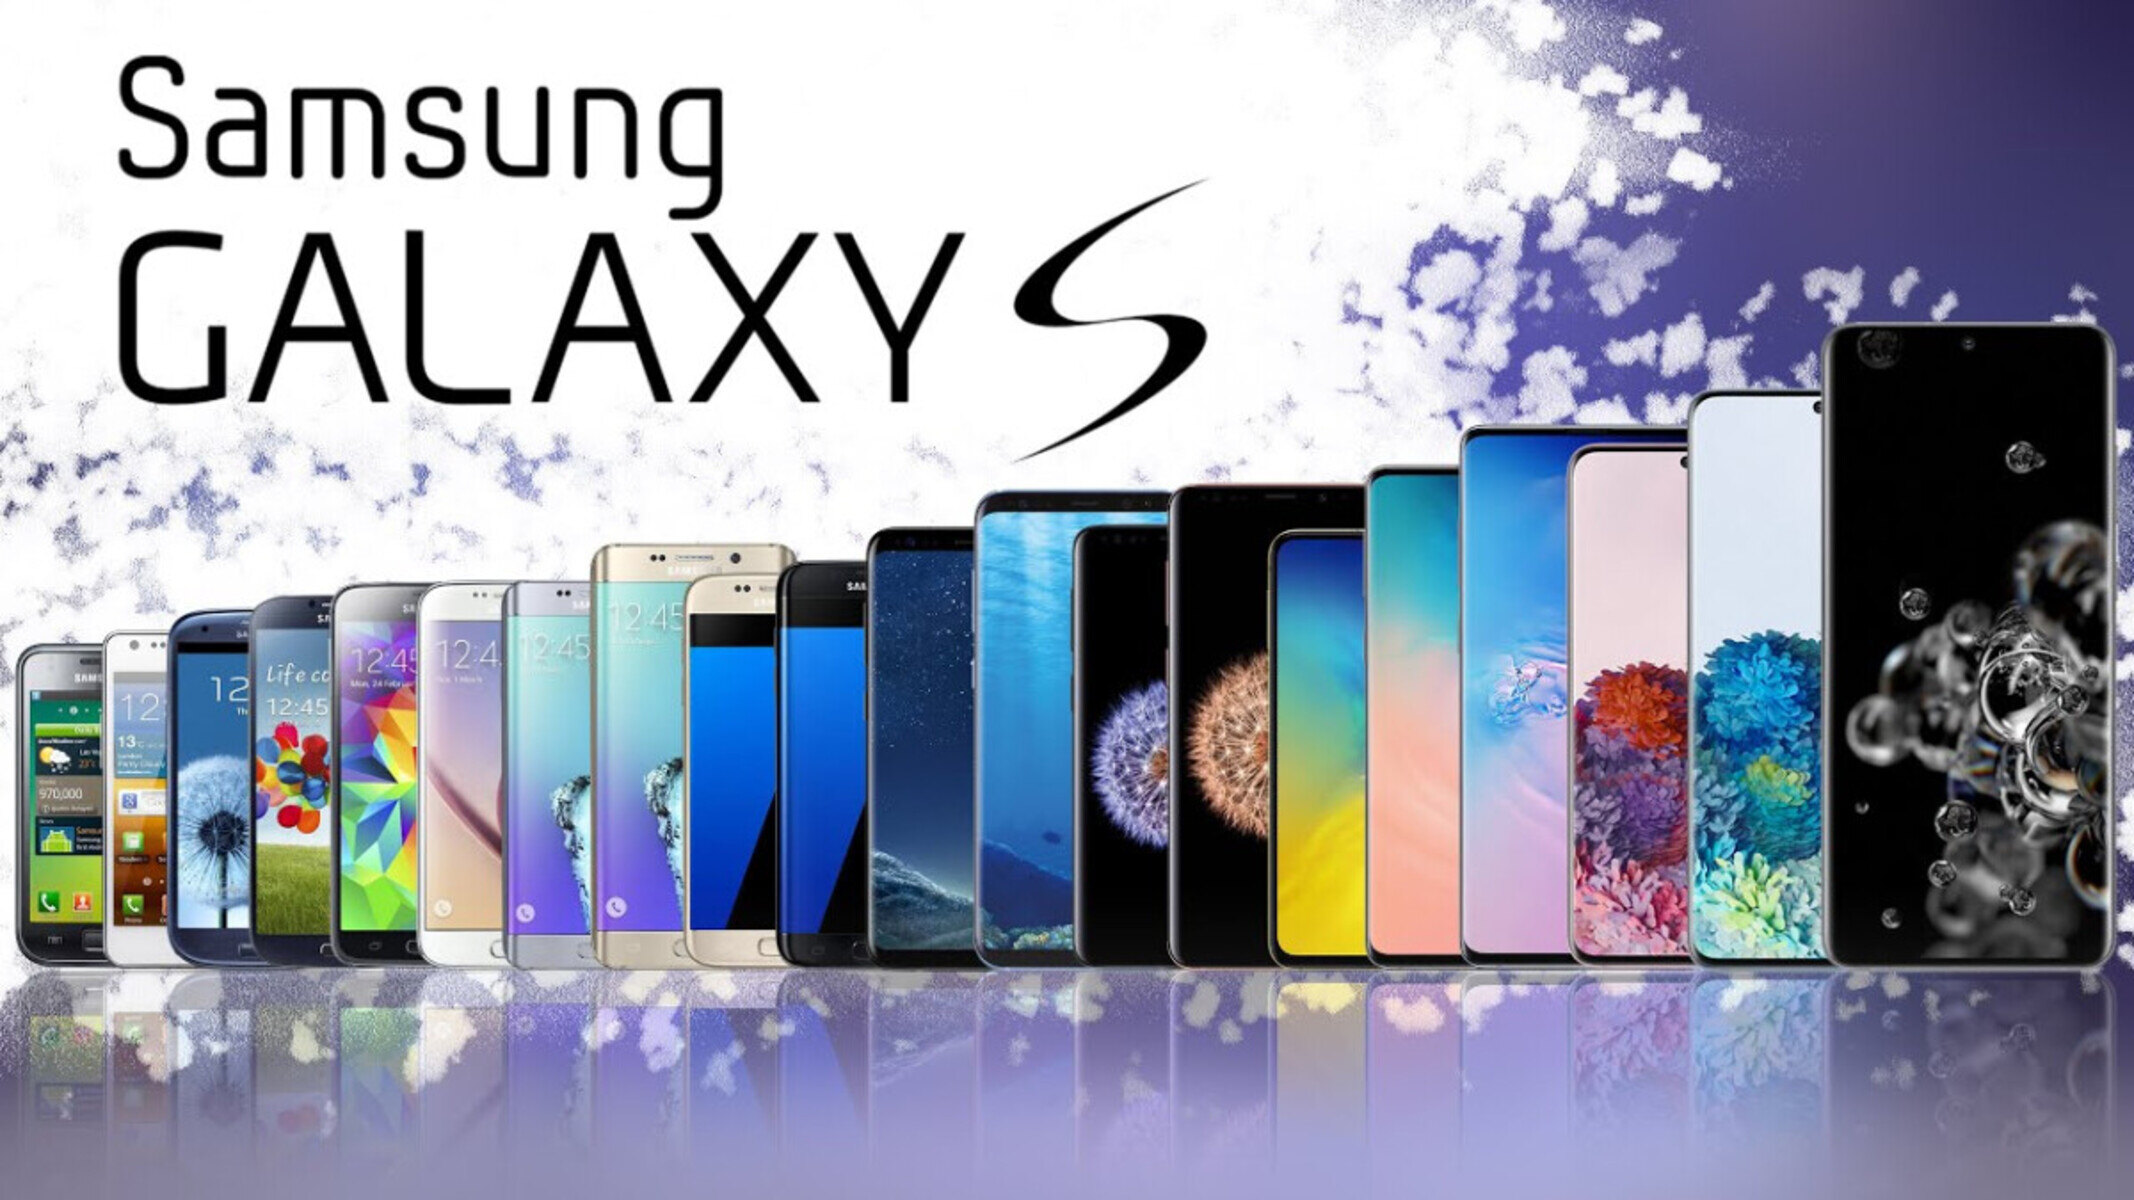 Samsung Galaxy S Phones: What You Need To Know